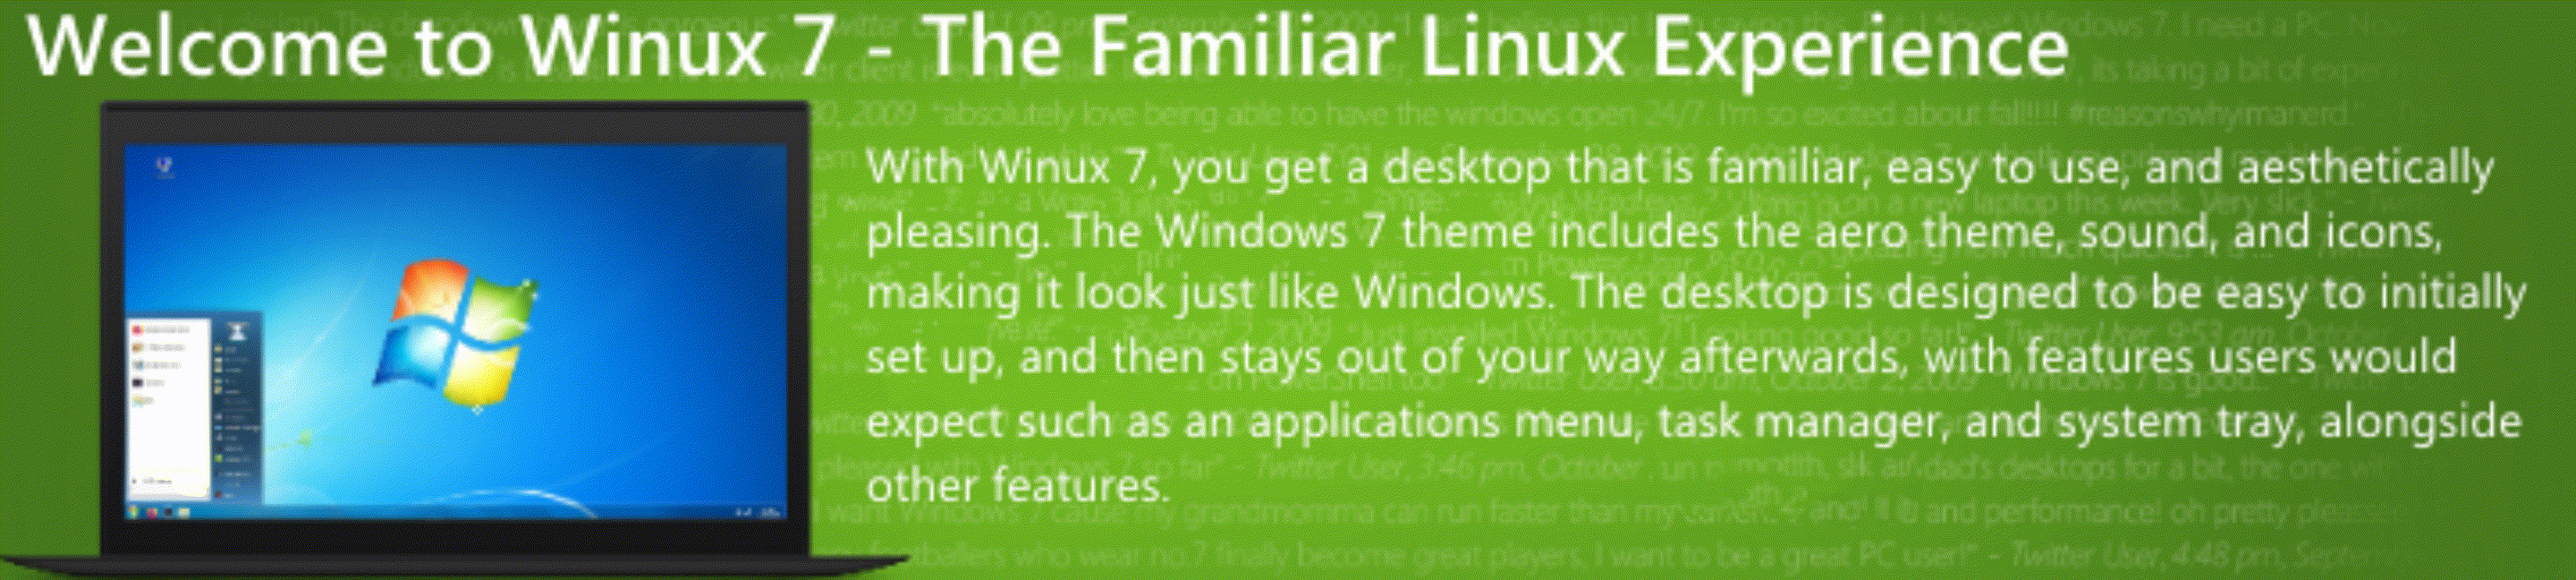 What others are saying about Windows 7